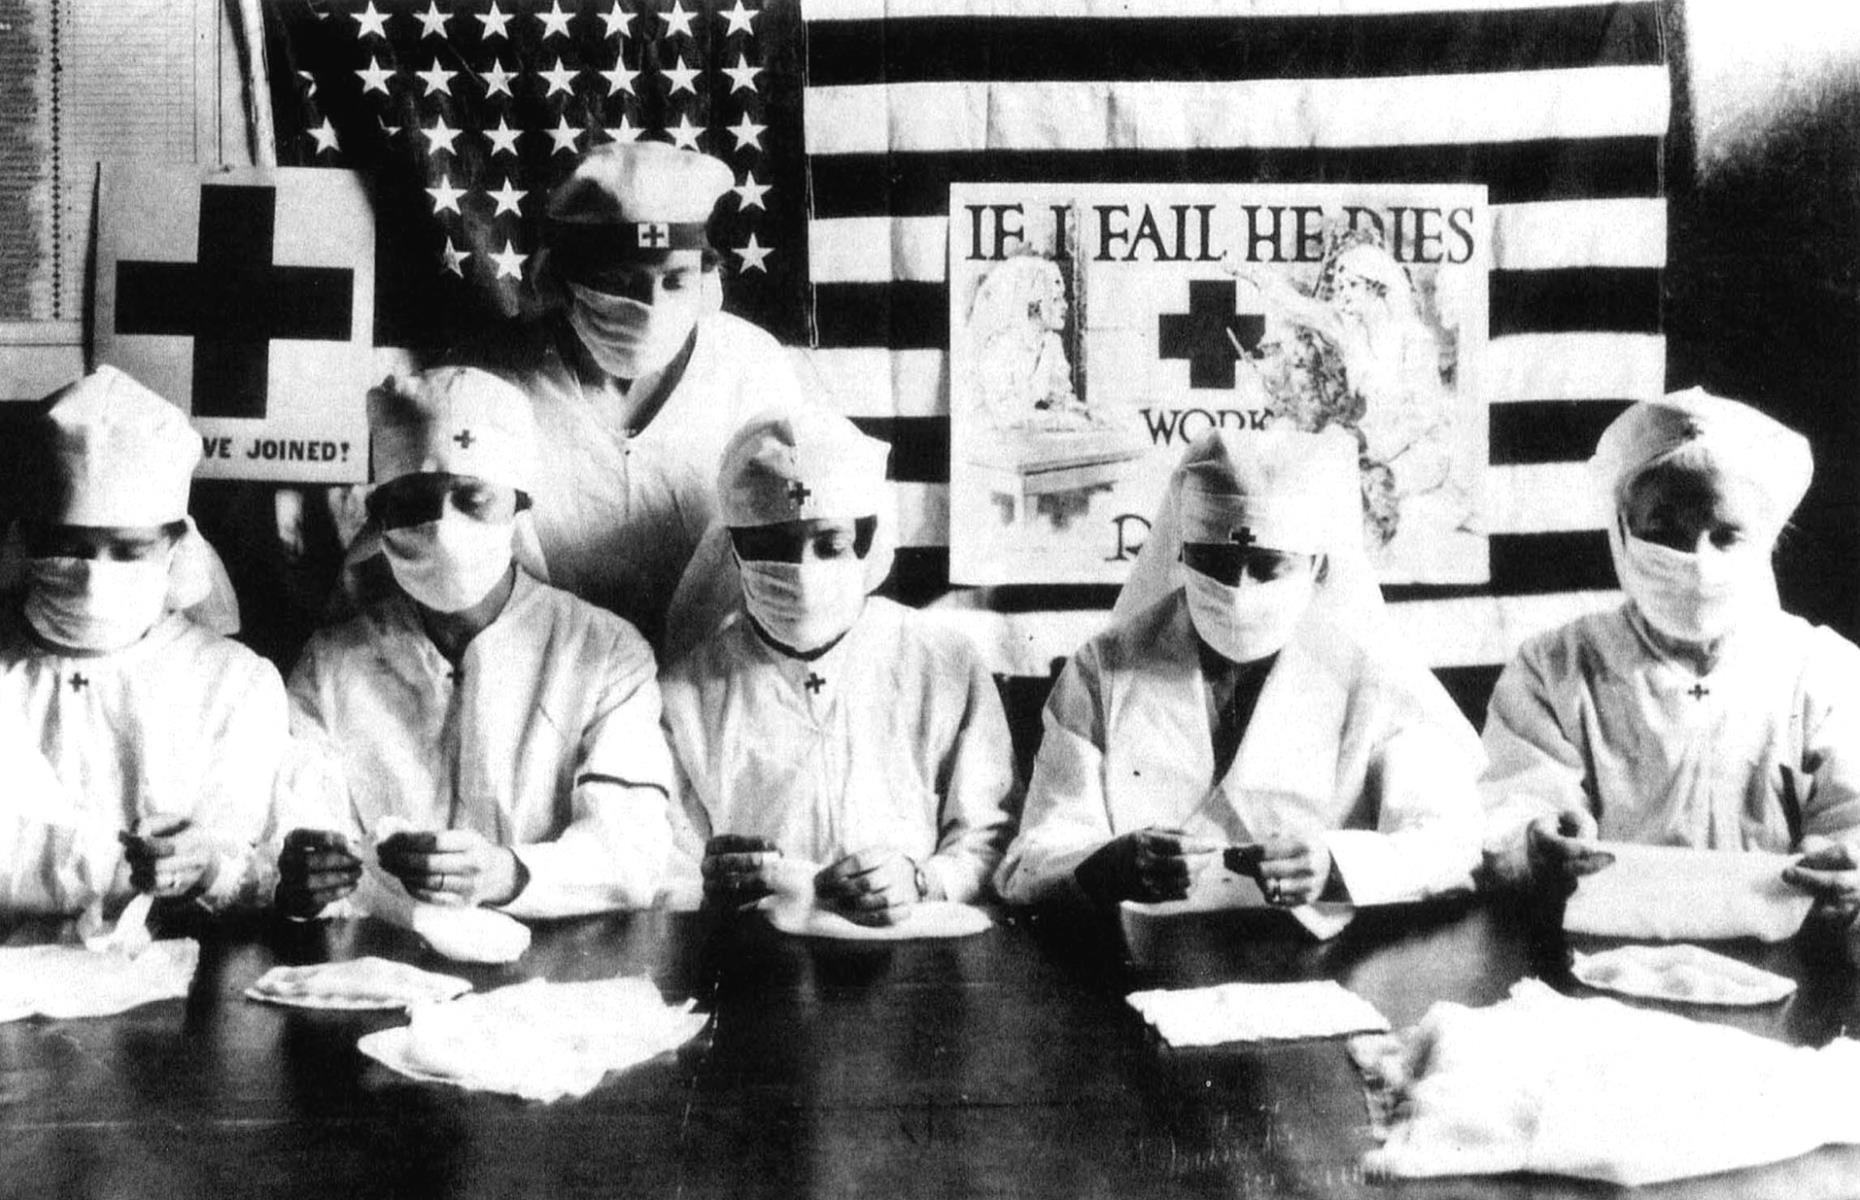 Canada lost 55,000 lives to Spanish Flu